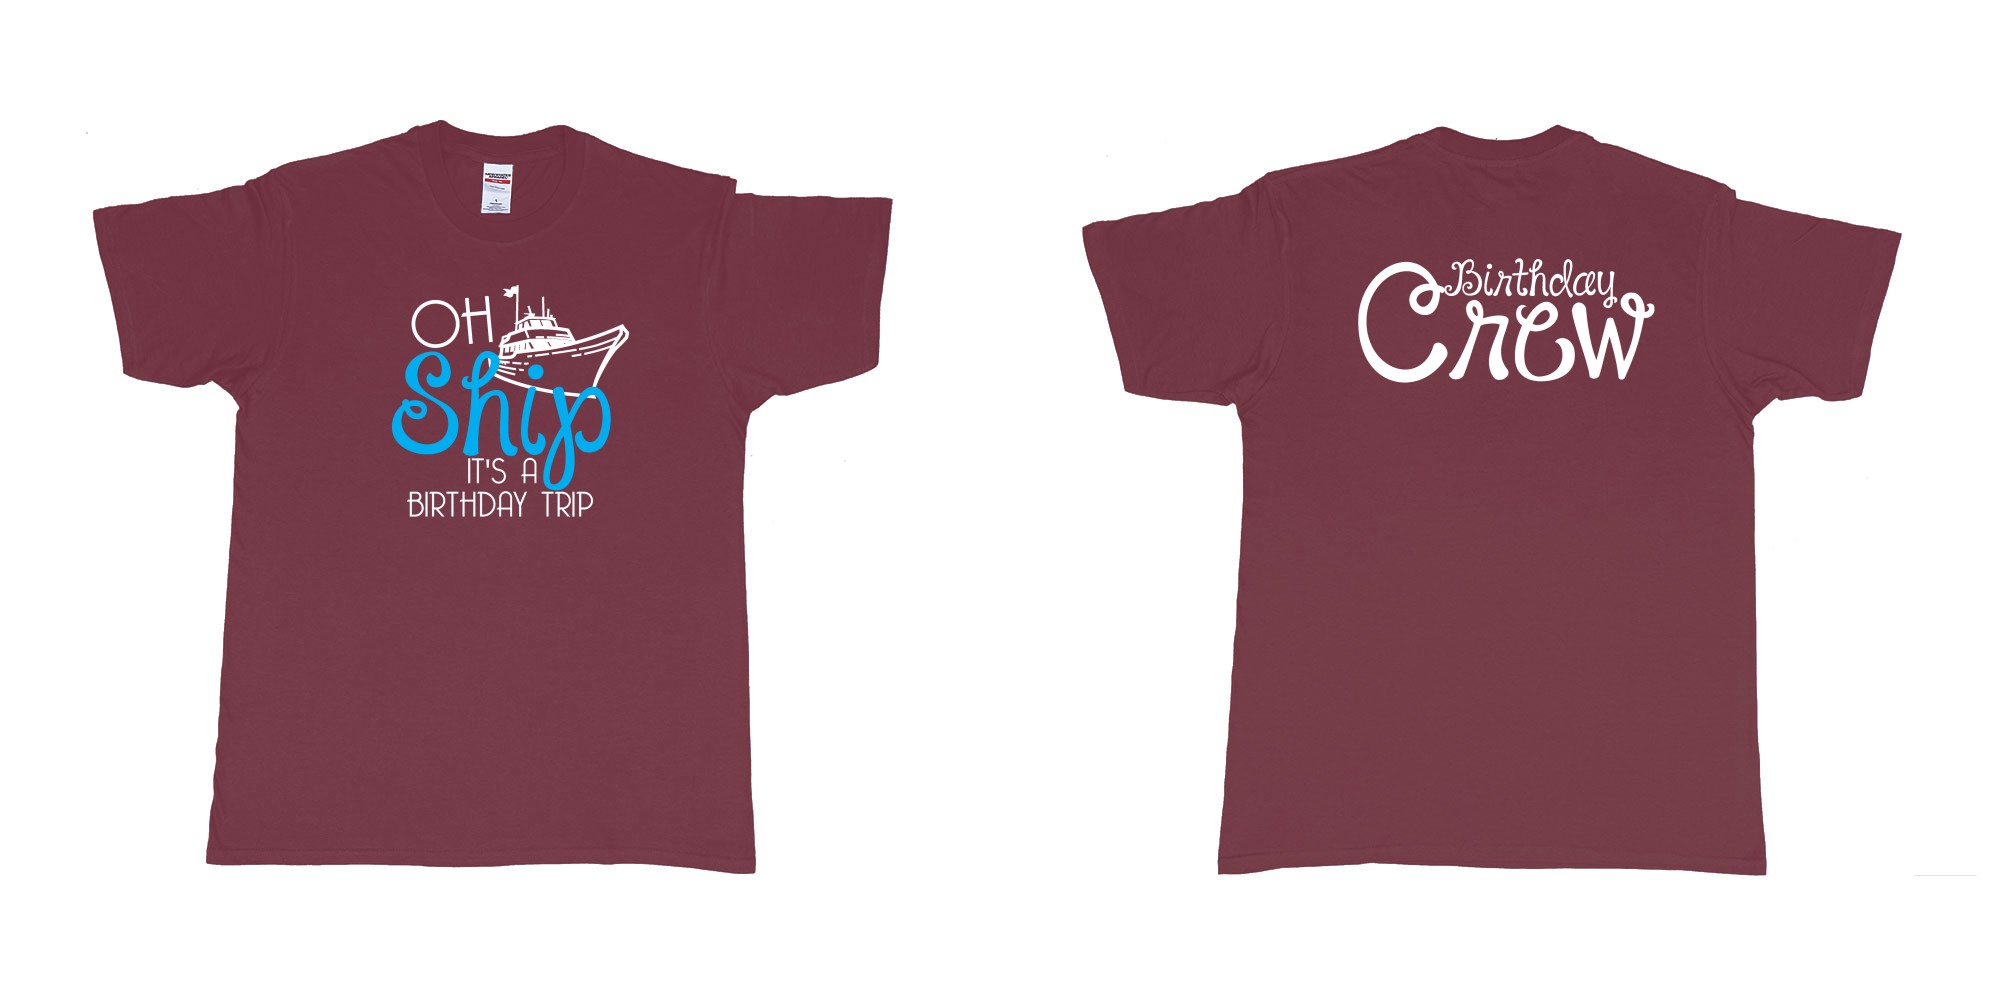 Custom tshirt design Birthday Oh Ship in fabric color marron choice your own text made in Bali by The Pirate Way